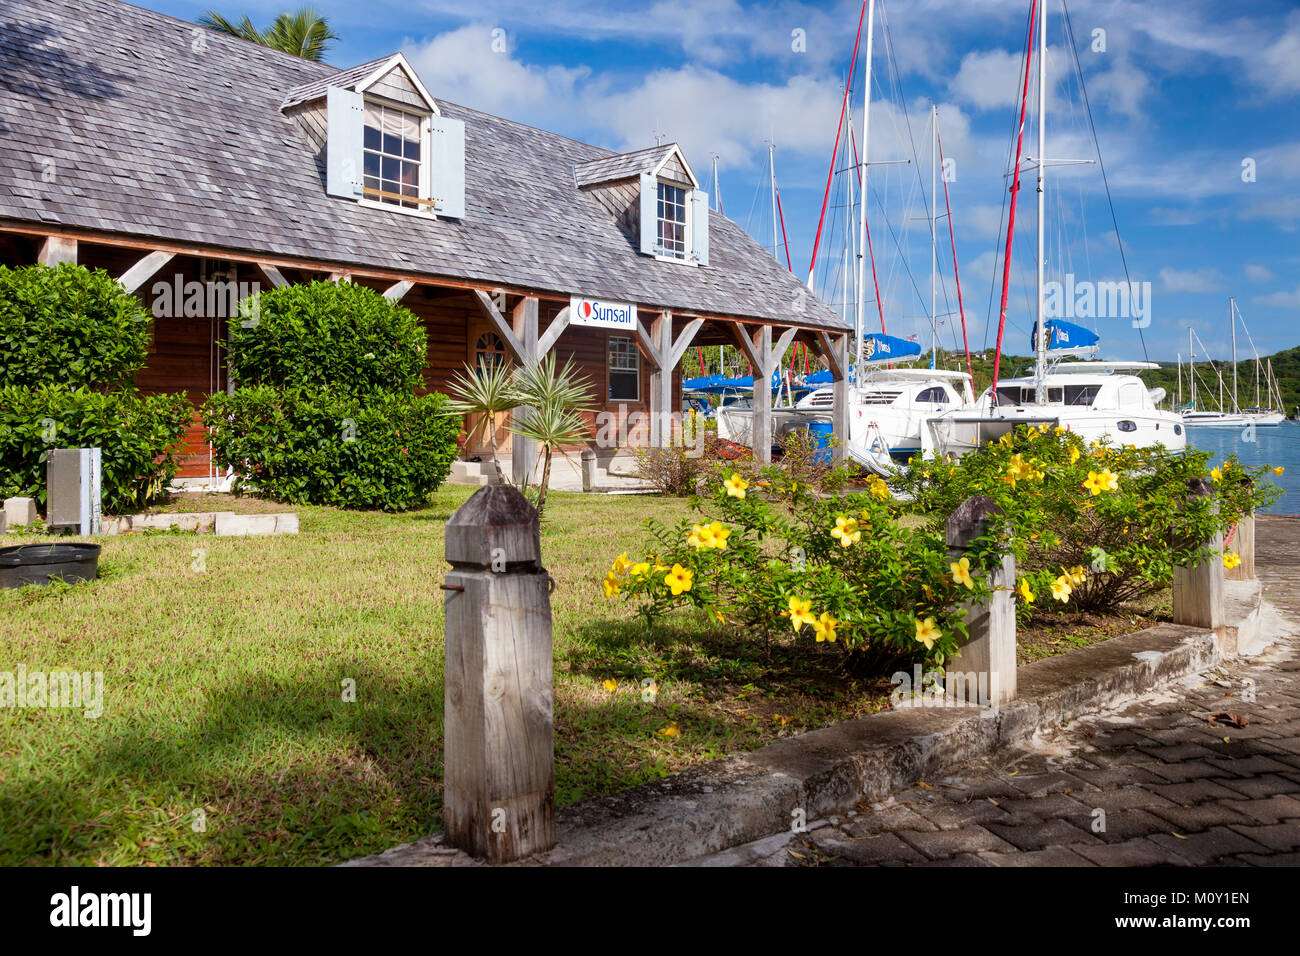 Sunsail Boat Rentals and sailboats at Nelson's Dockyard, Antigua, West Indies Stock Photo